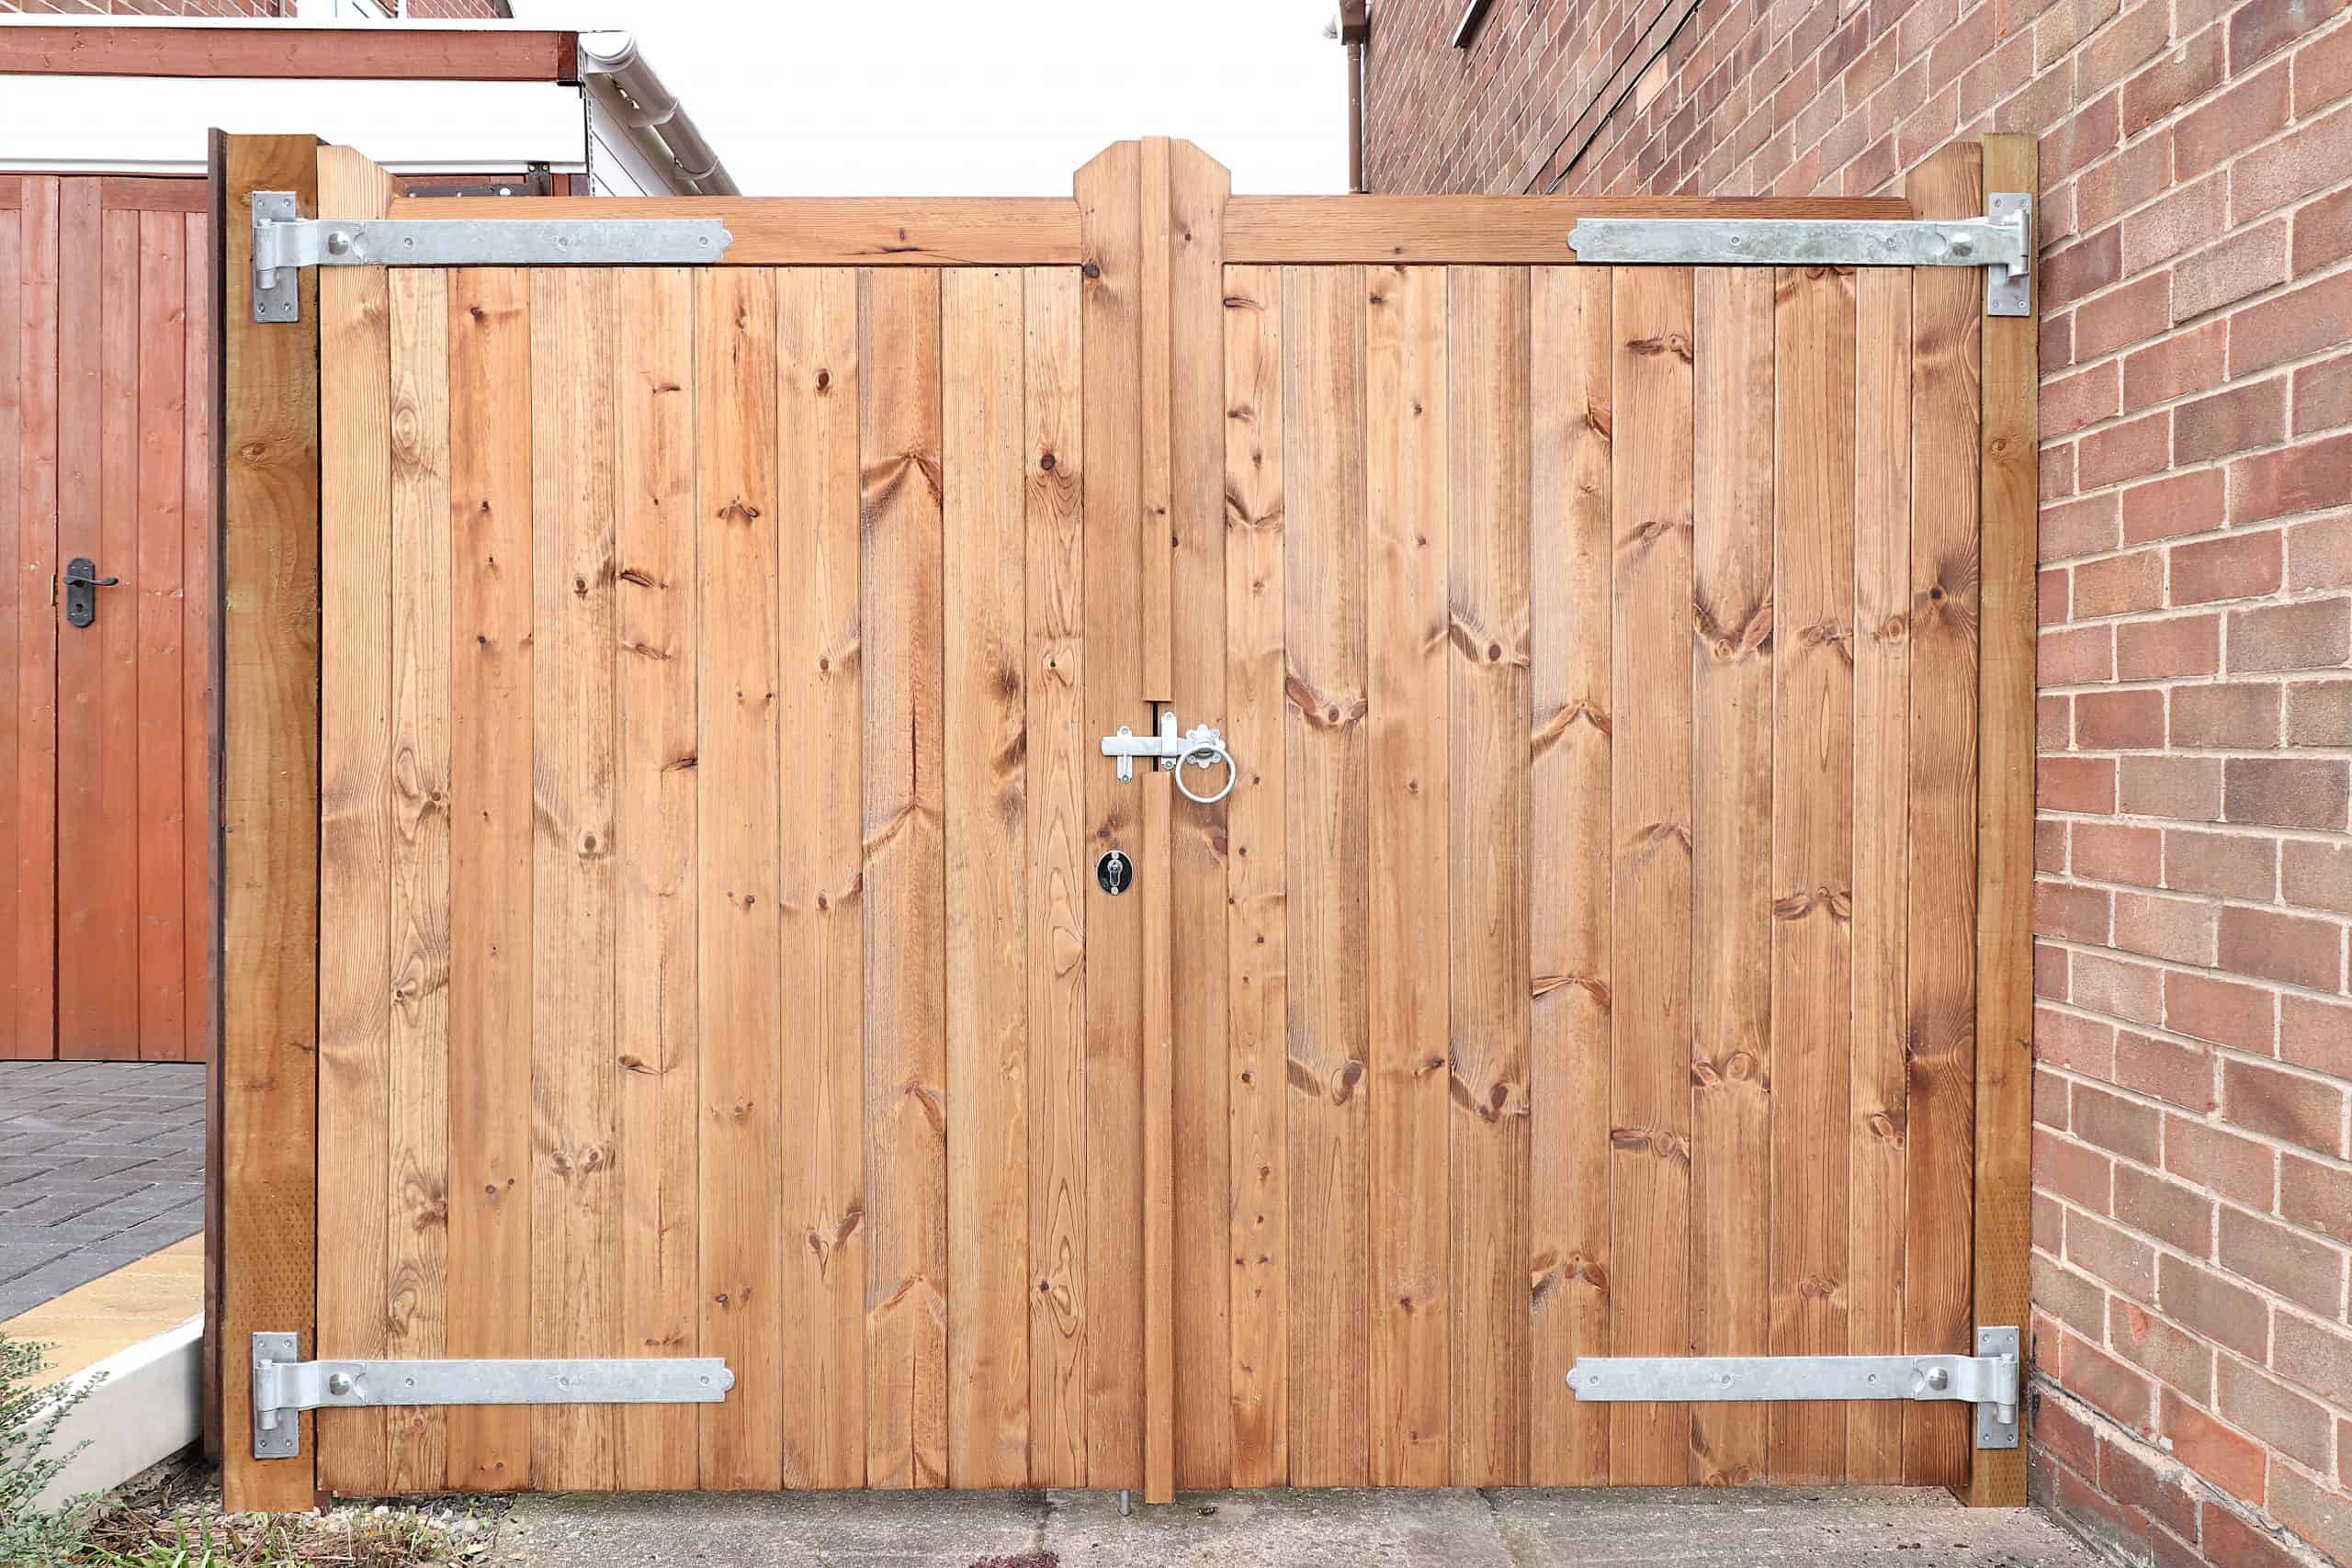 How To Build A Double Fence Gate, How To Install A Garden Gate Frame